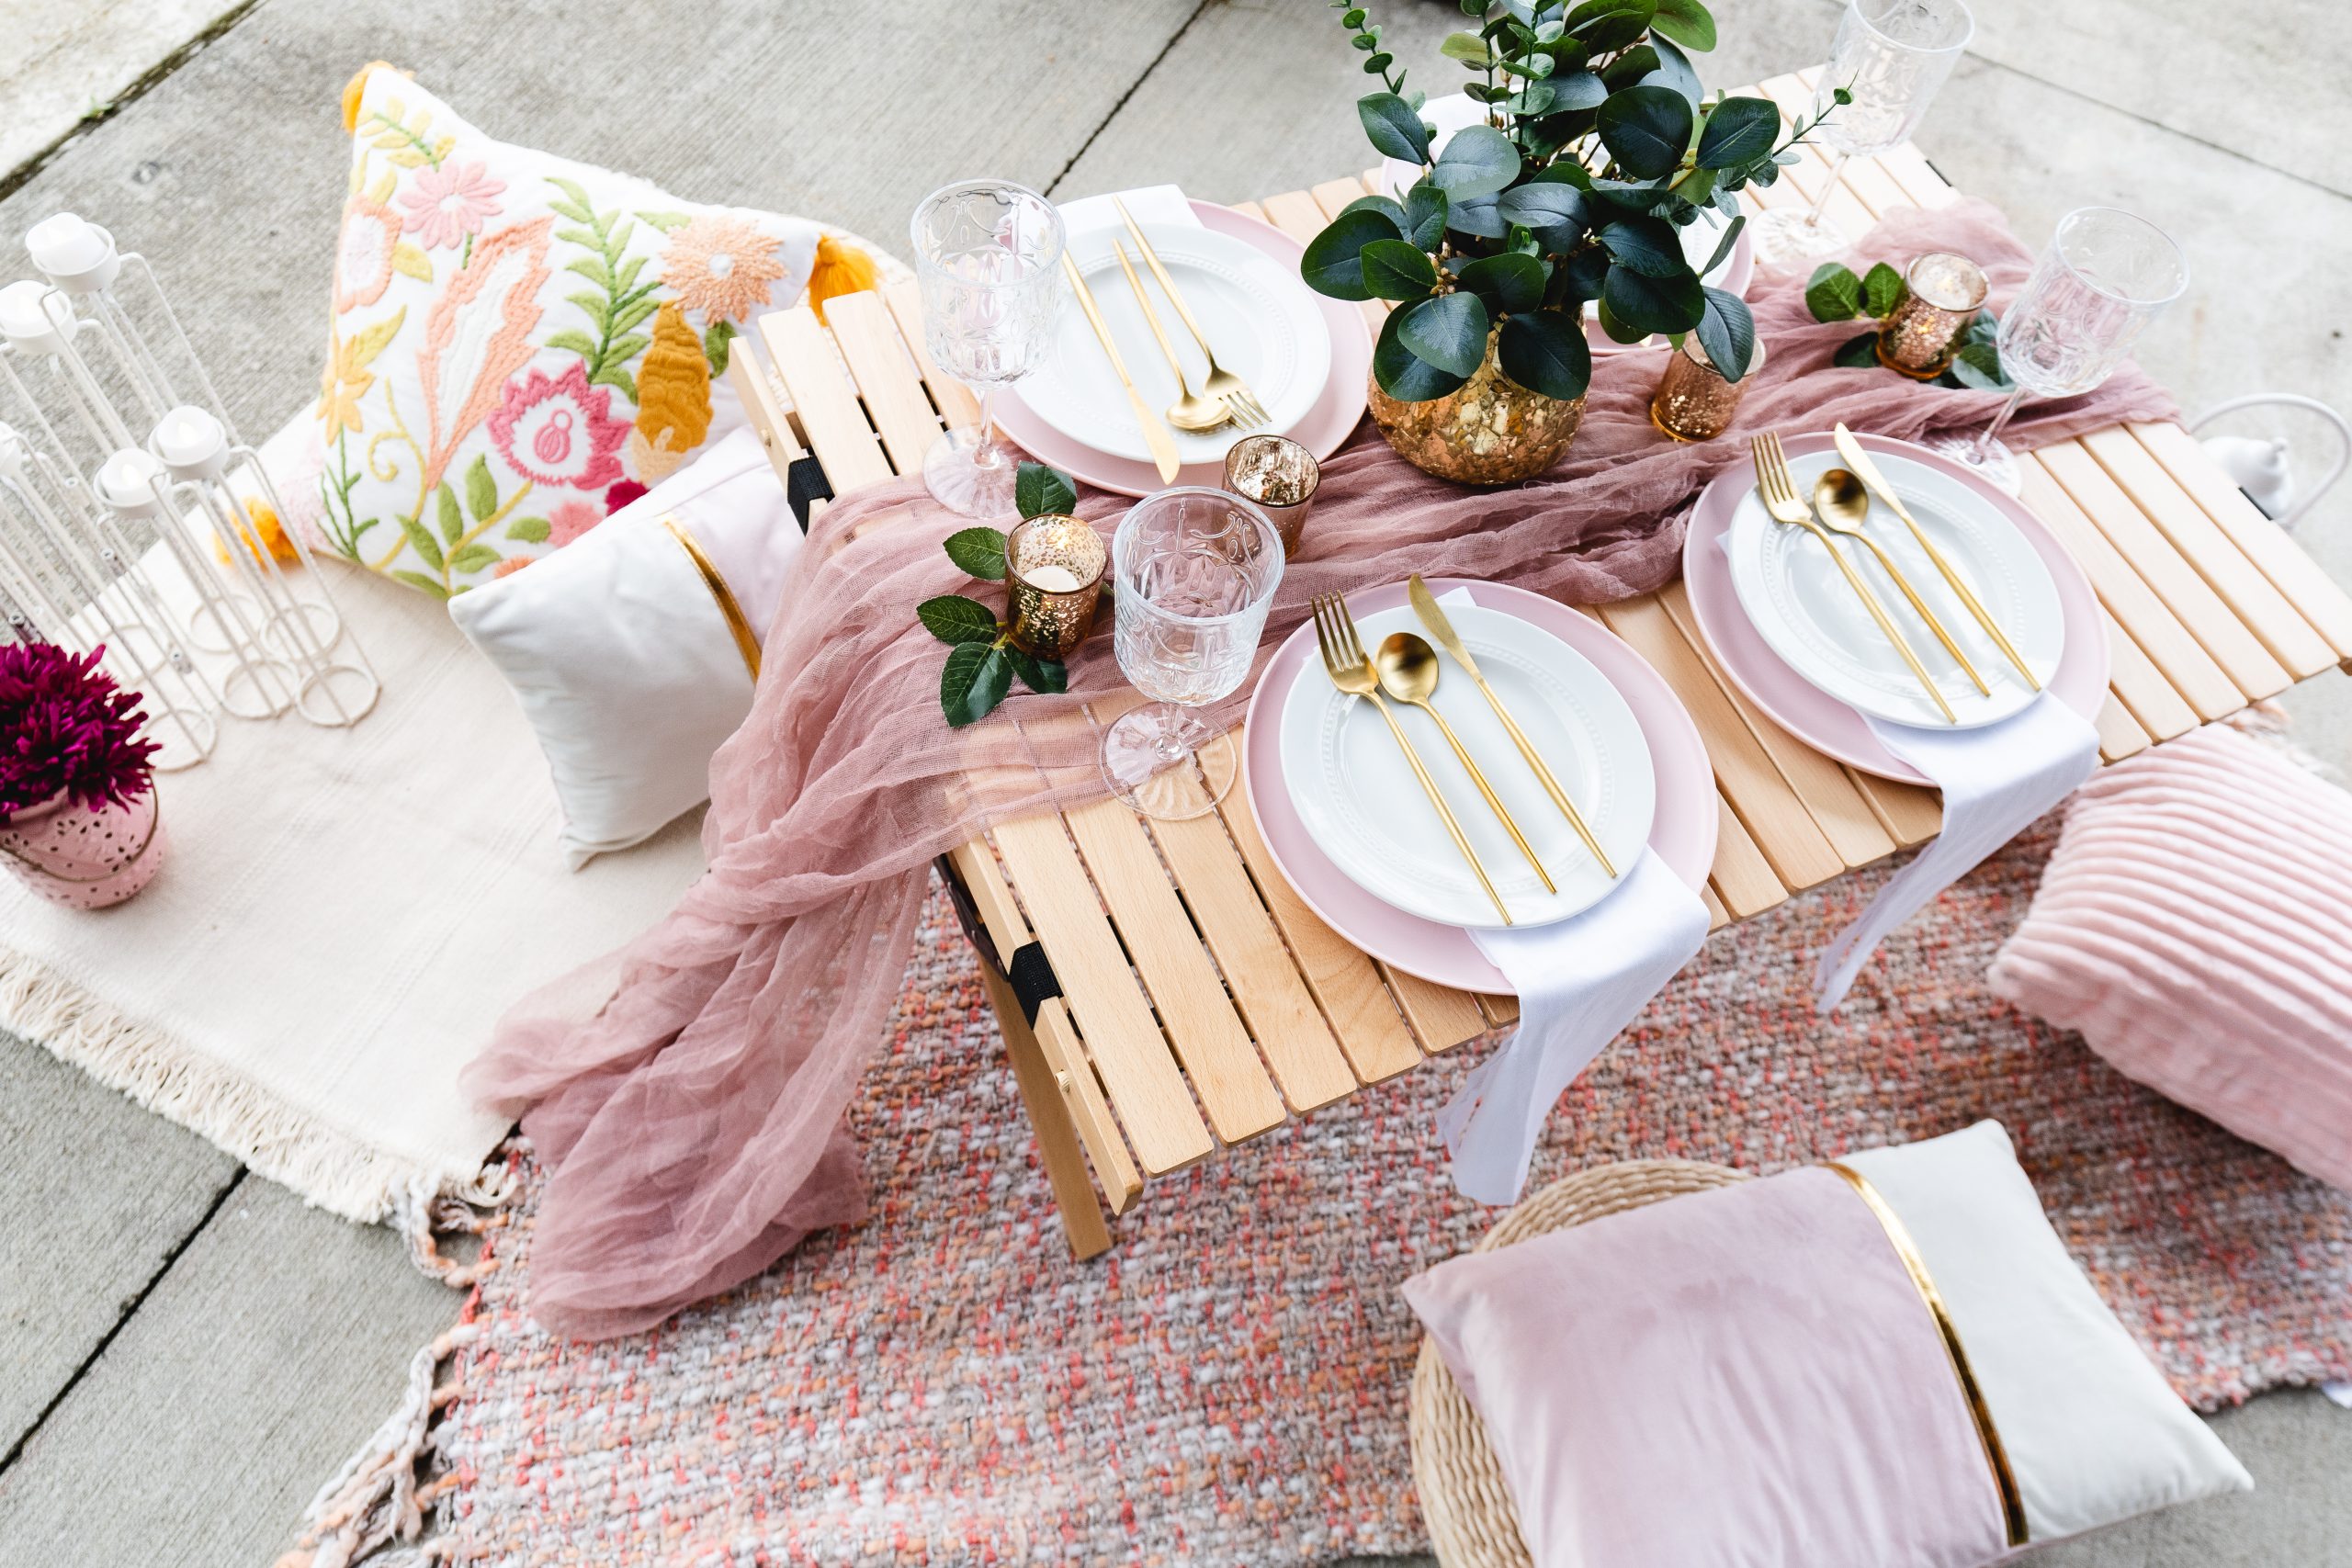 Luxury picnic planners share top tips to create stunning setup - Good  Morning America